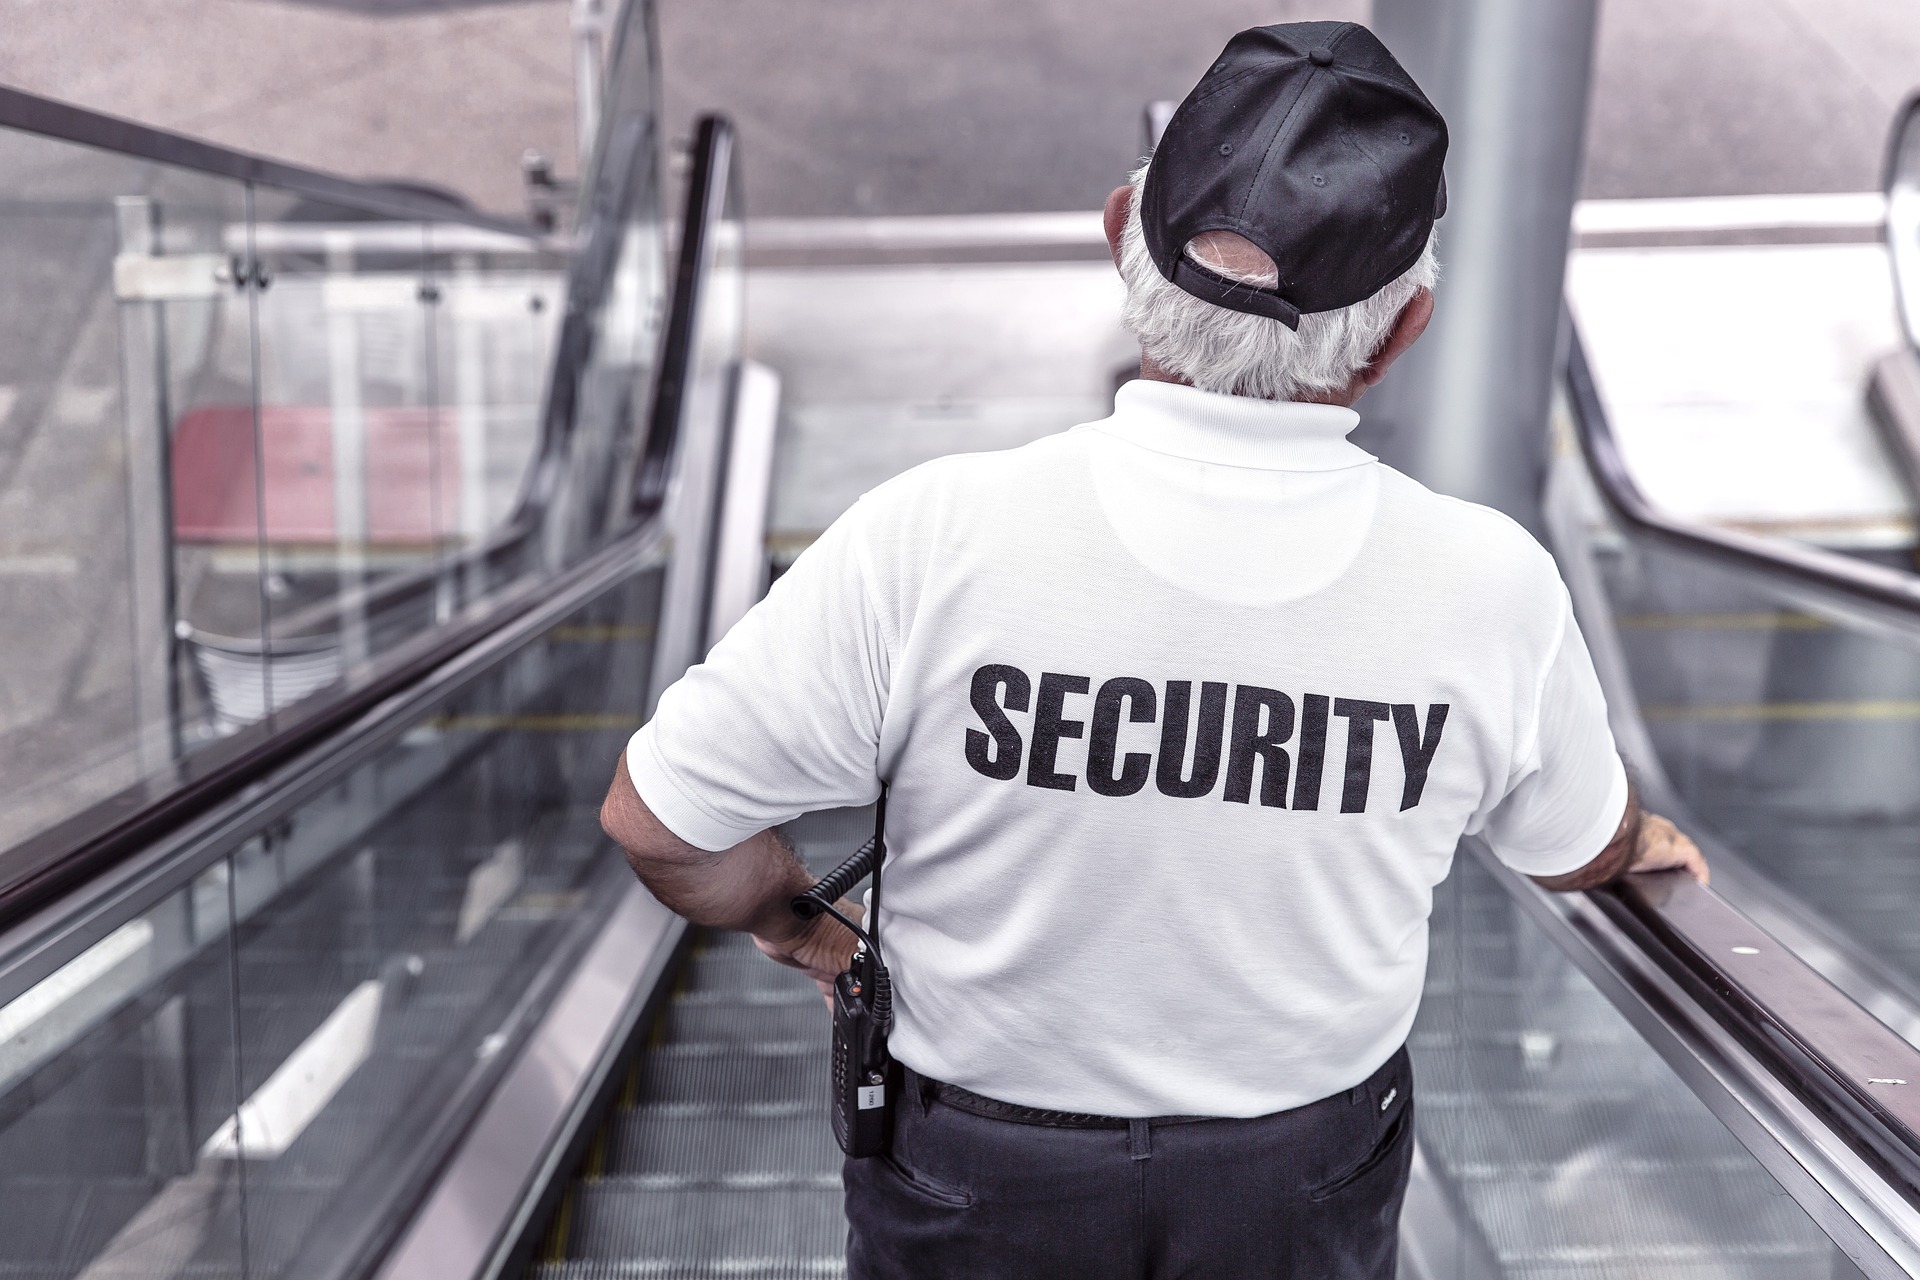 Image Description: A man in a white shirt with the word "security" printed in the back. declining down an escalader